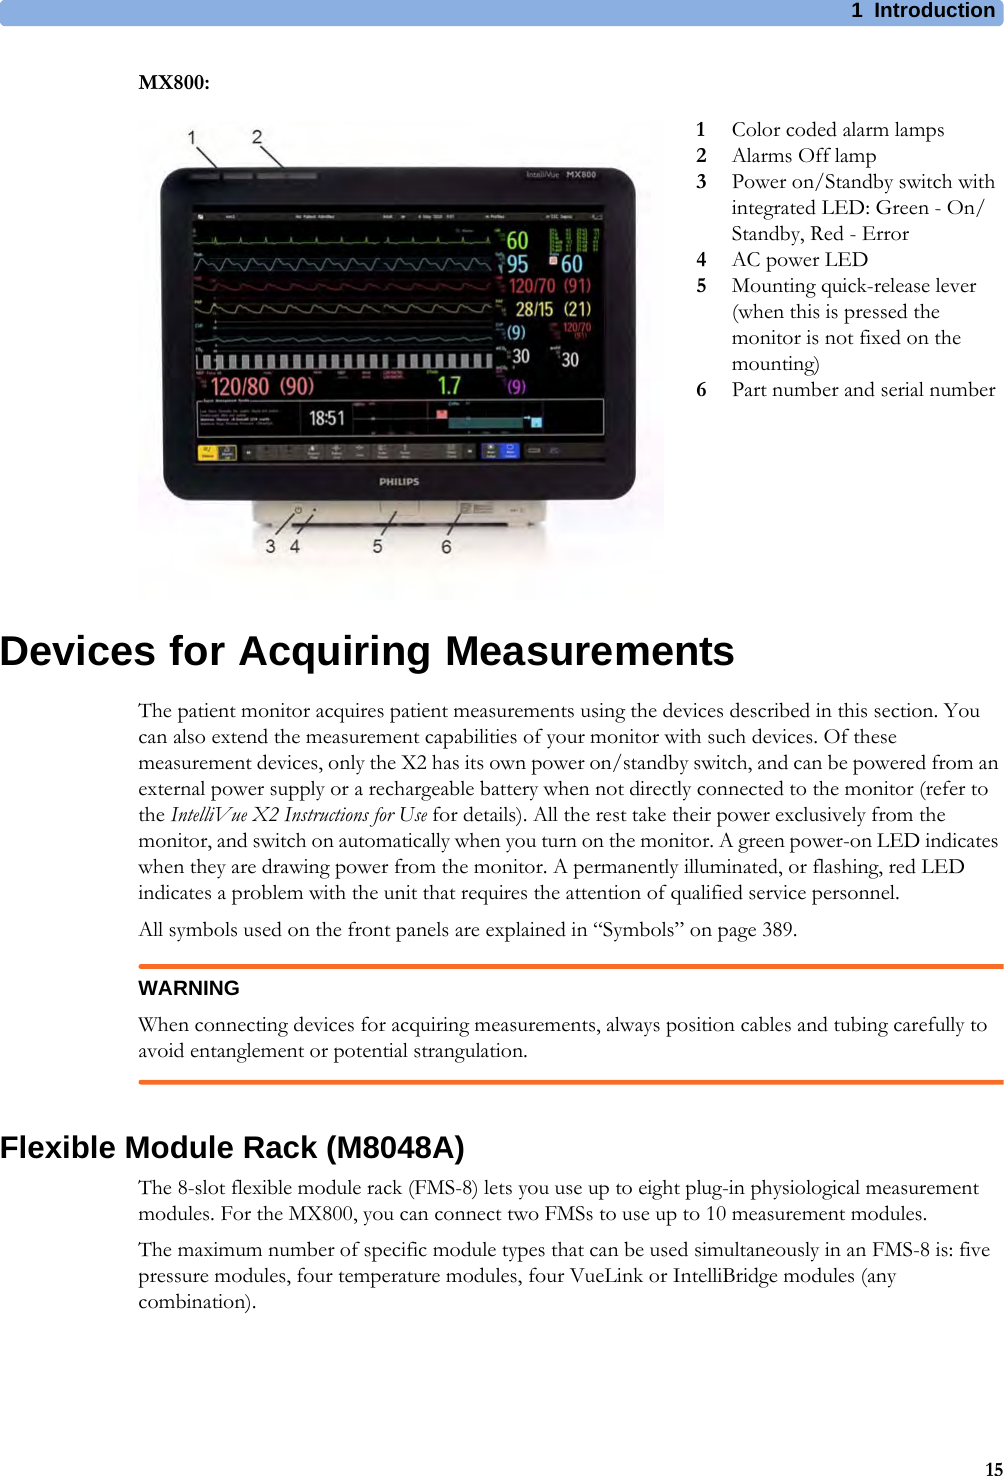 1 Introduction15MX800:Devices for Acquiring MeasurementsThe patient monitor acquires patient measurements using the devices described in this section. You can also extend the measurement capabilities of your monitor with such devices. Of these measurement devices, only the X2 has its own power on/standby switch, and can be powered from an external power supply or a rechargeable battery when not directly connected to the monitor (refer to the IntelliVue X2 Instructions for Use for details). All the rest take their power exclusively from the monitor, and switch on automatically when you turn on the monitor. A green power-on LED indicates when they are drawing power from the monitor. A permanently illuminated, or flashing, red LED indicates a problem with the unit that requires the attention of qualified service personnel.All symbols used on the front panels are explained in “Symbols” on page 389.WARNINGWhen connecting devices for acquiring measurements, always position cables and tubing carefully to avoid entanglement or potential strangulation.Flexible Module Rack (M8048A)The 8-slot flexible module rack (FMS-8) lets you use up to eight plug-in physiological measurement modules. For the MX800, you can connect two FMSs to use up to 10 measurement modules.The maximum number of specific module types that can be used simultaneously in an FMS-8 is: five pressure modules, four temperature modules, four VueLink or IntelliBridge modules (any combination).1Color coded alarm lamps2Alarms Off lamp3Power on/Standby switch with integrated LED: Green - On/Standby, Red - Error4AC power LED5Mounting quick-release lever (when this is pressed the monitor is not fixed on the mounting)6Part number and serial number